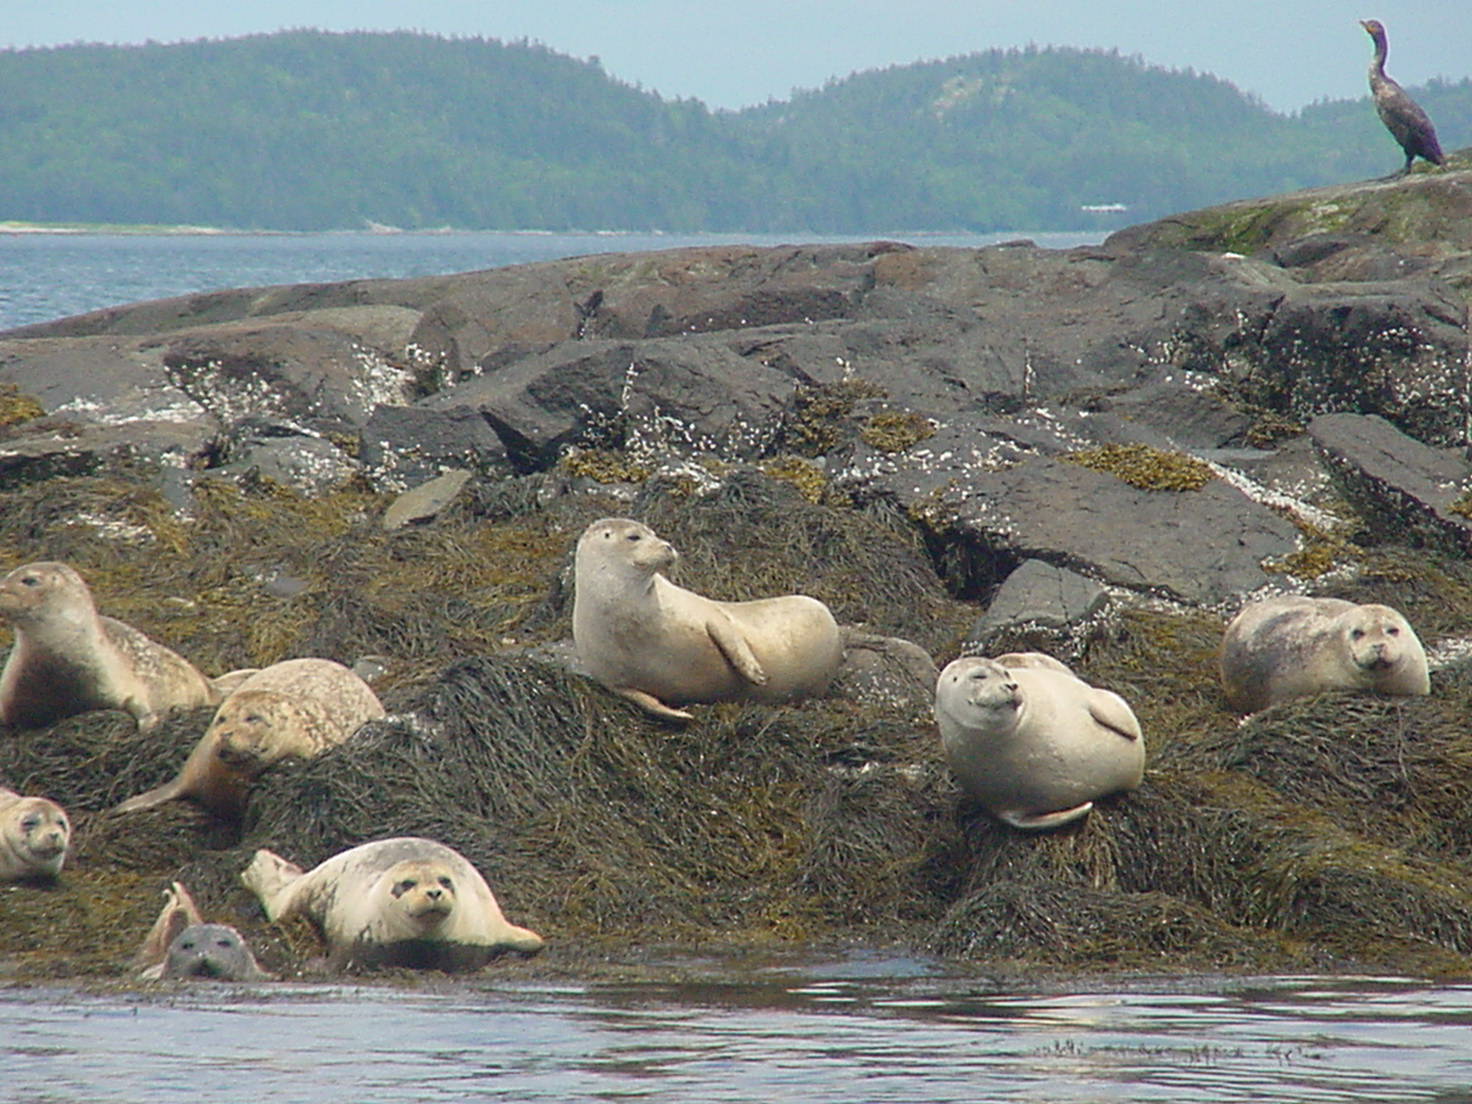 Seals Sunbathing (user submitted)